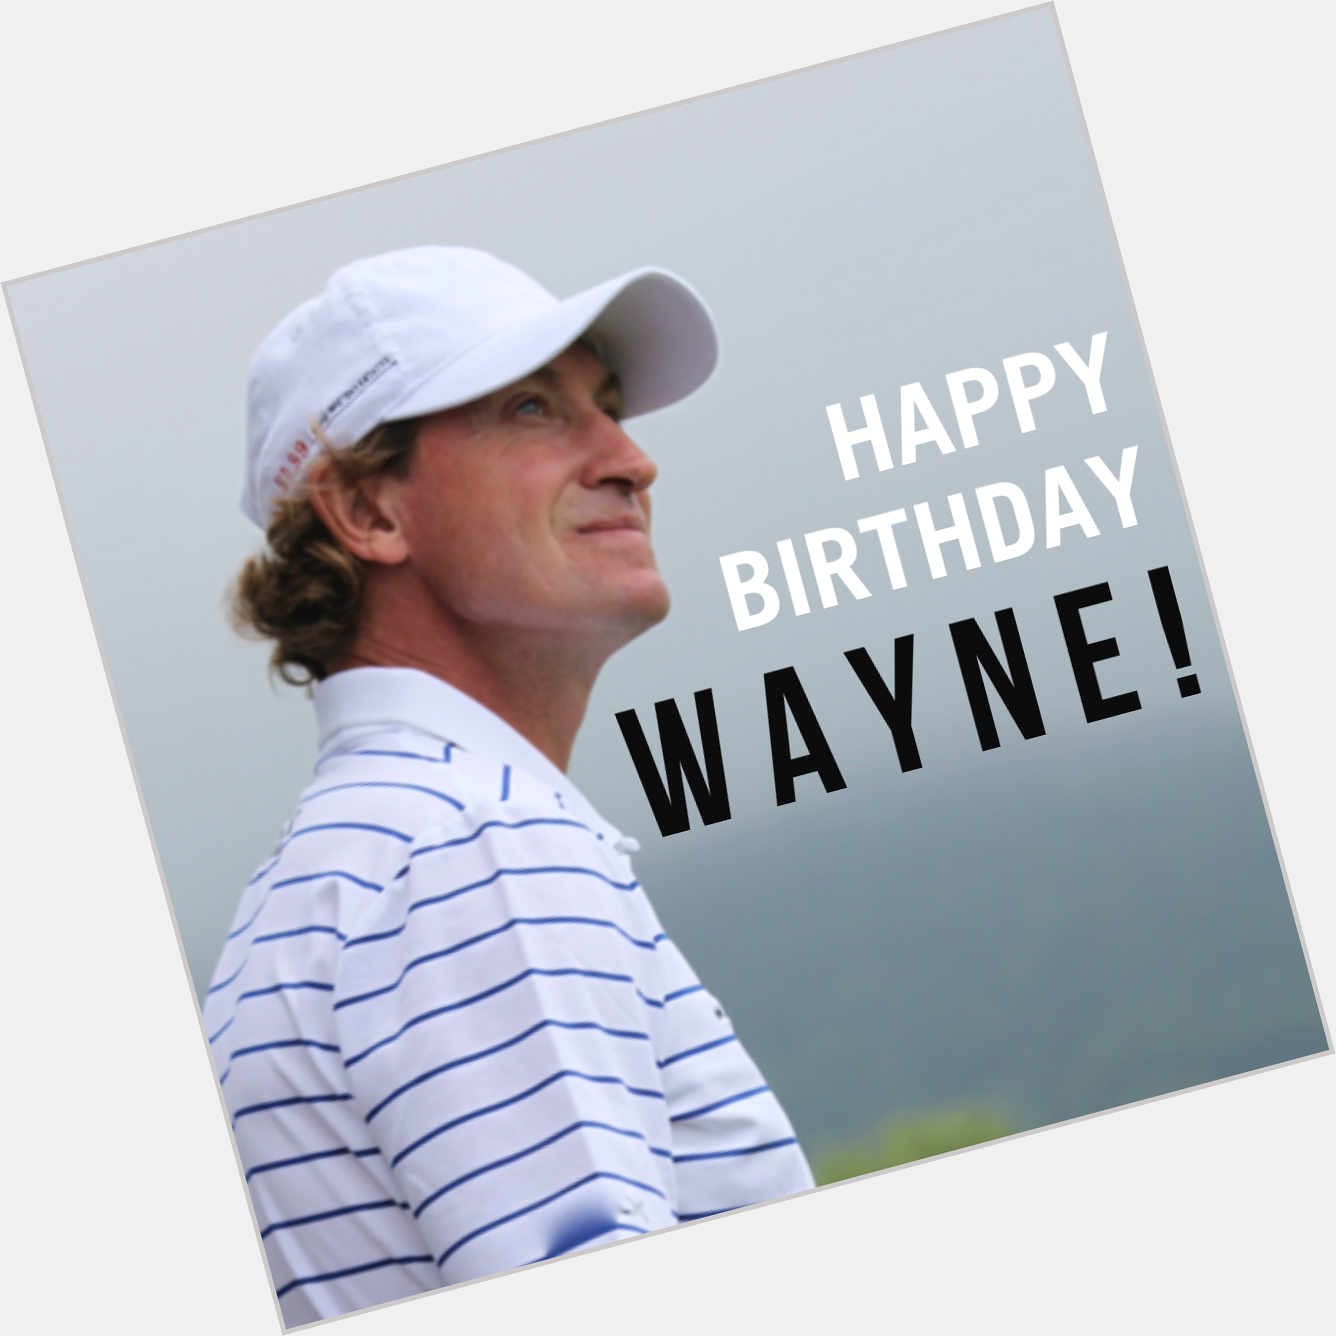 Happy Birthday to Wayne Gretzky. We hope you have a great day, Wayne! Cheers!  